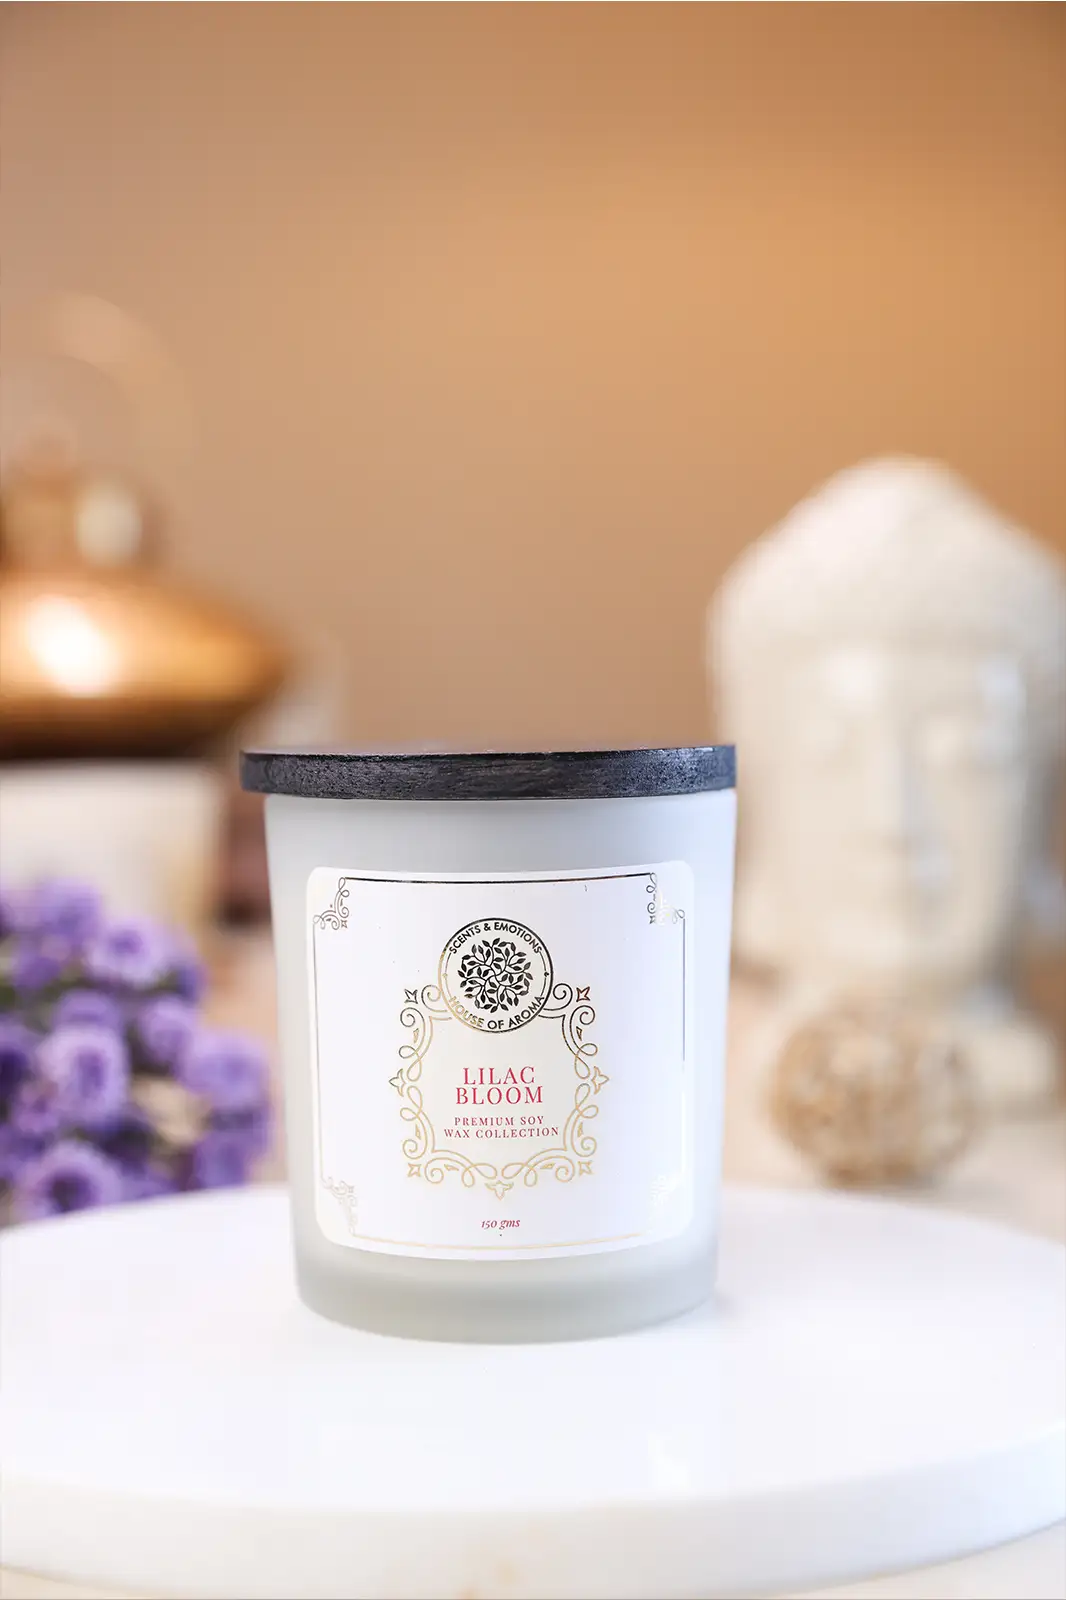 lilac bloom candle fragrance with natural soy wax, soy wax candles, candle fragrance, candle scent, beeswax candle, best fragrances candles, soy candle, soy wax scented candles, candle with scent, fragrance candle, wax of candle, best candle fragrance, beeswax candle scents, candle fragrance scents, candle wax, soy candle wax, natural candle, Aromatic candles, candles with soy wax, soy wax for candles